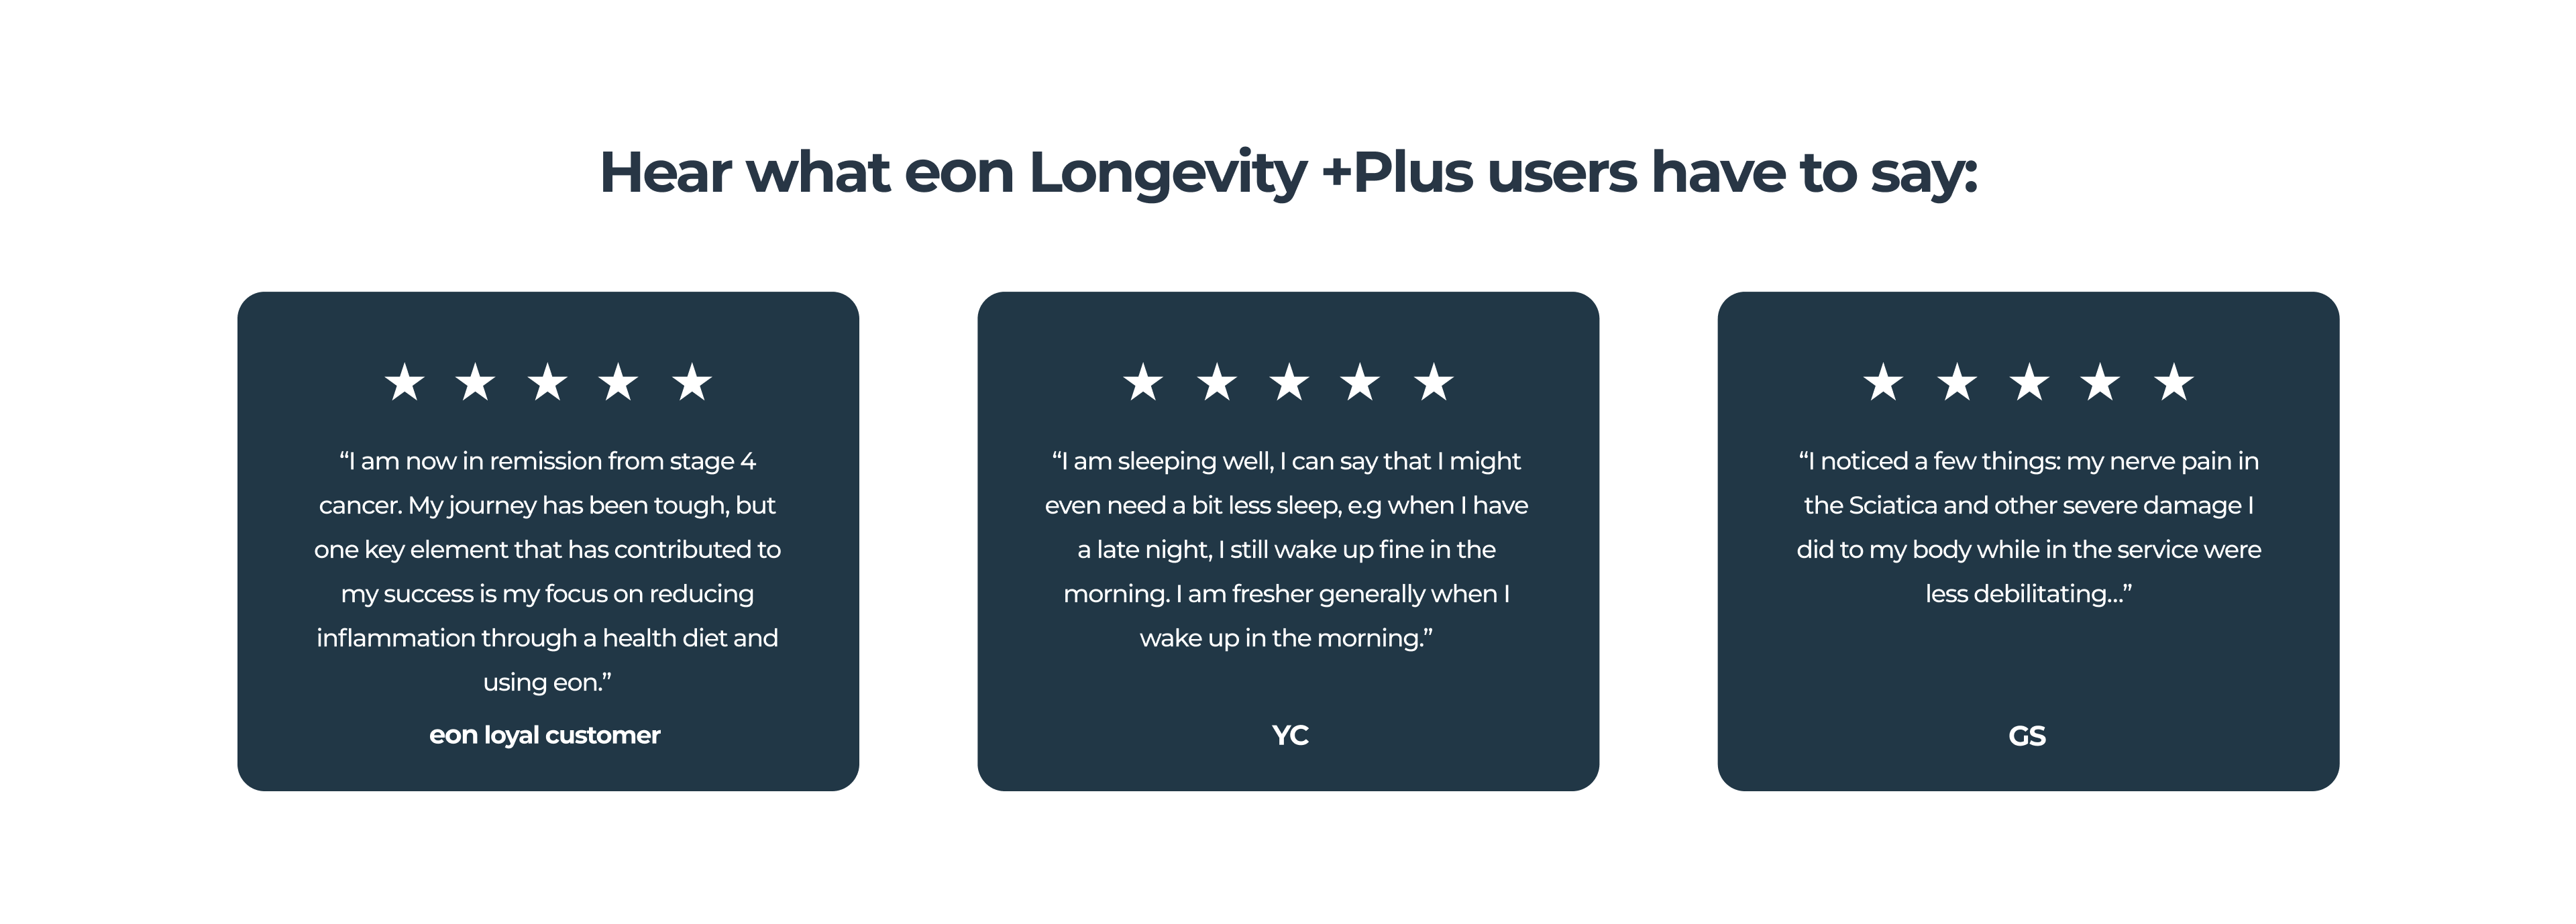 Hear what eon Longevity +Plus drinkers have to say: